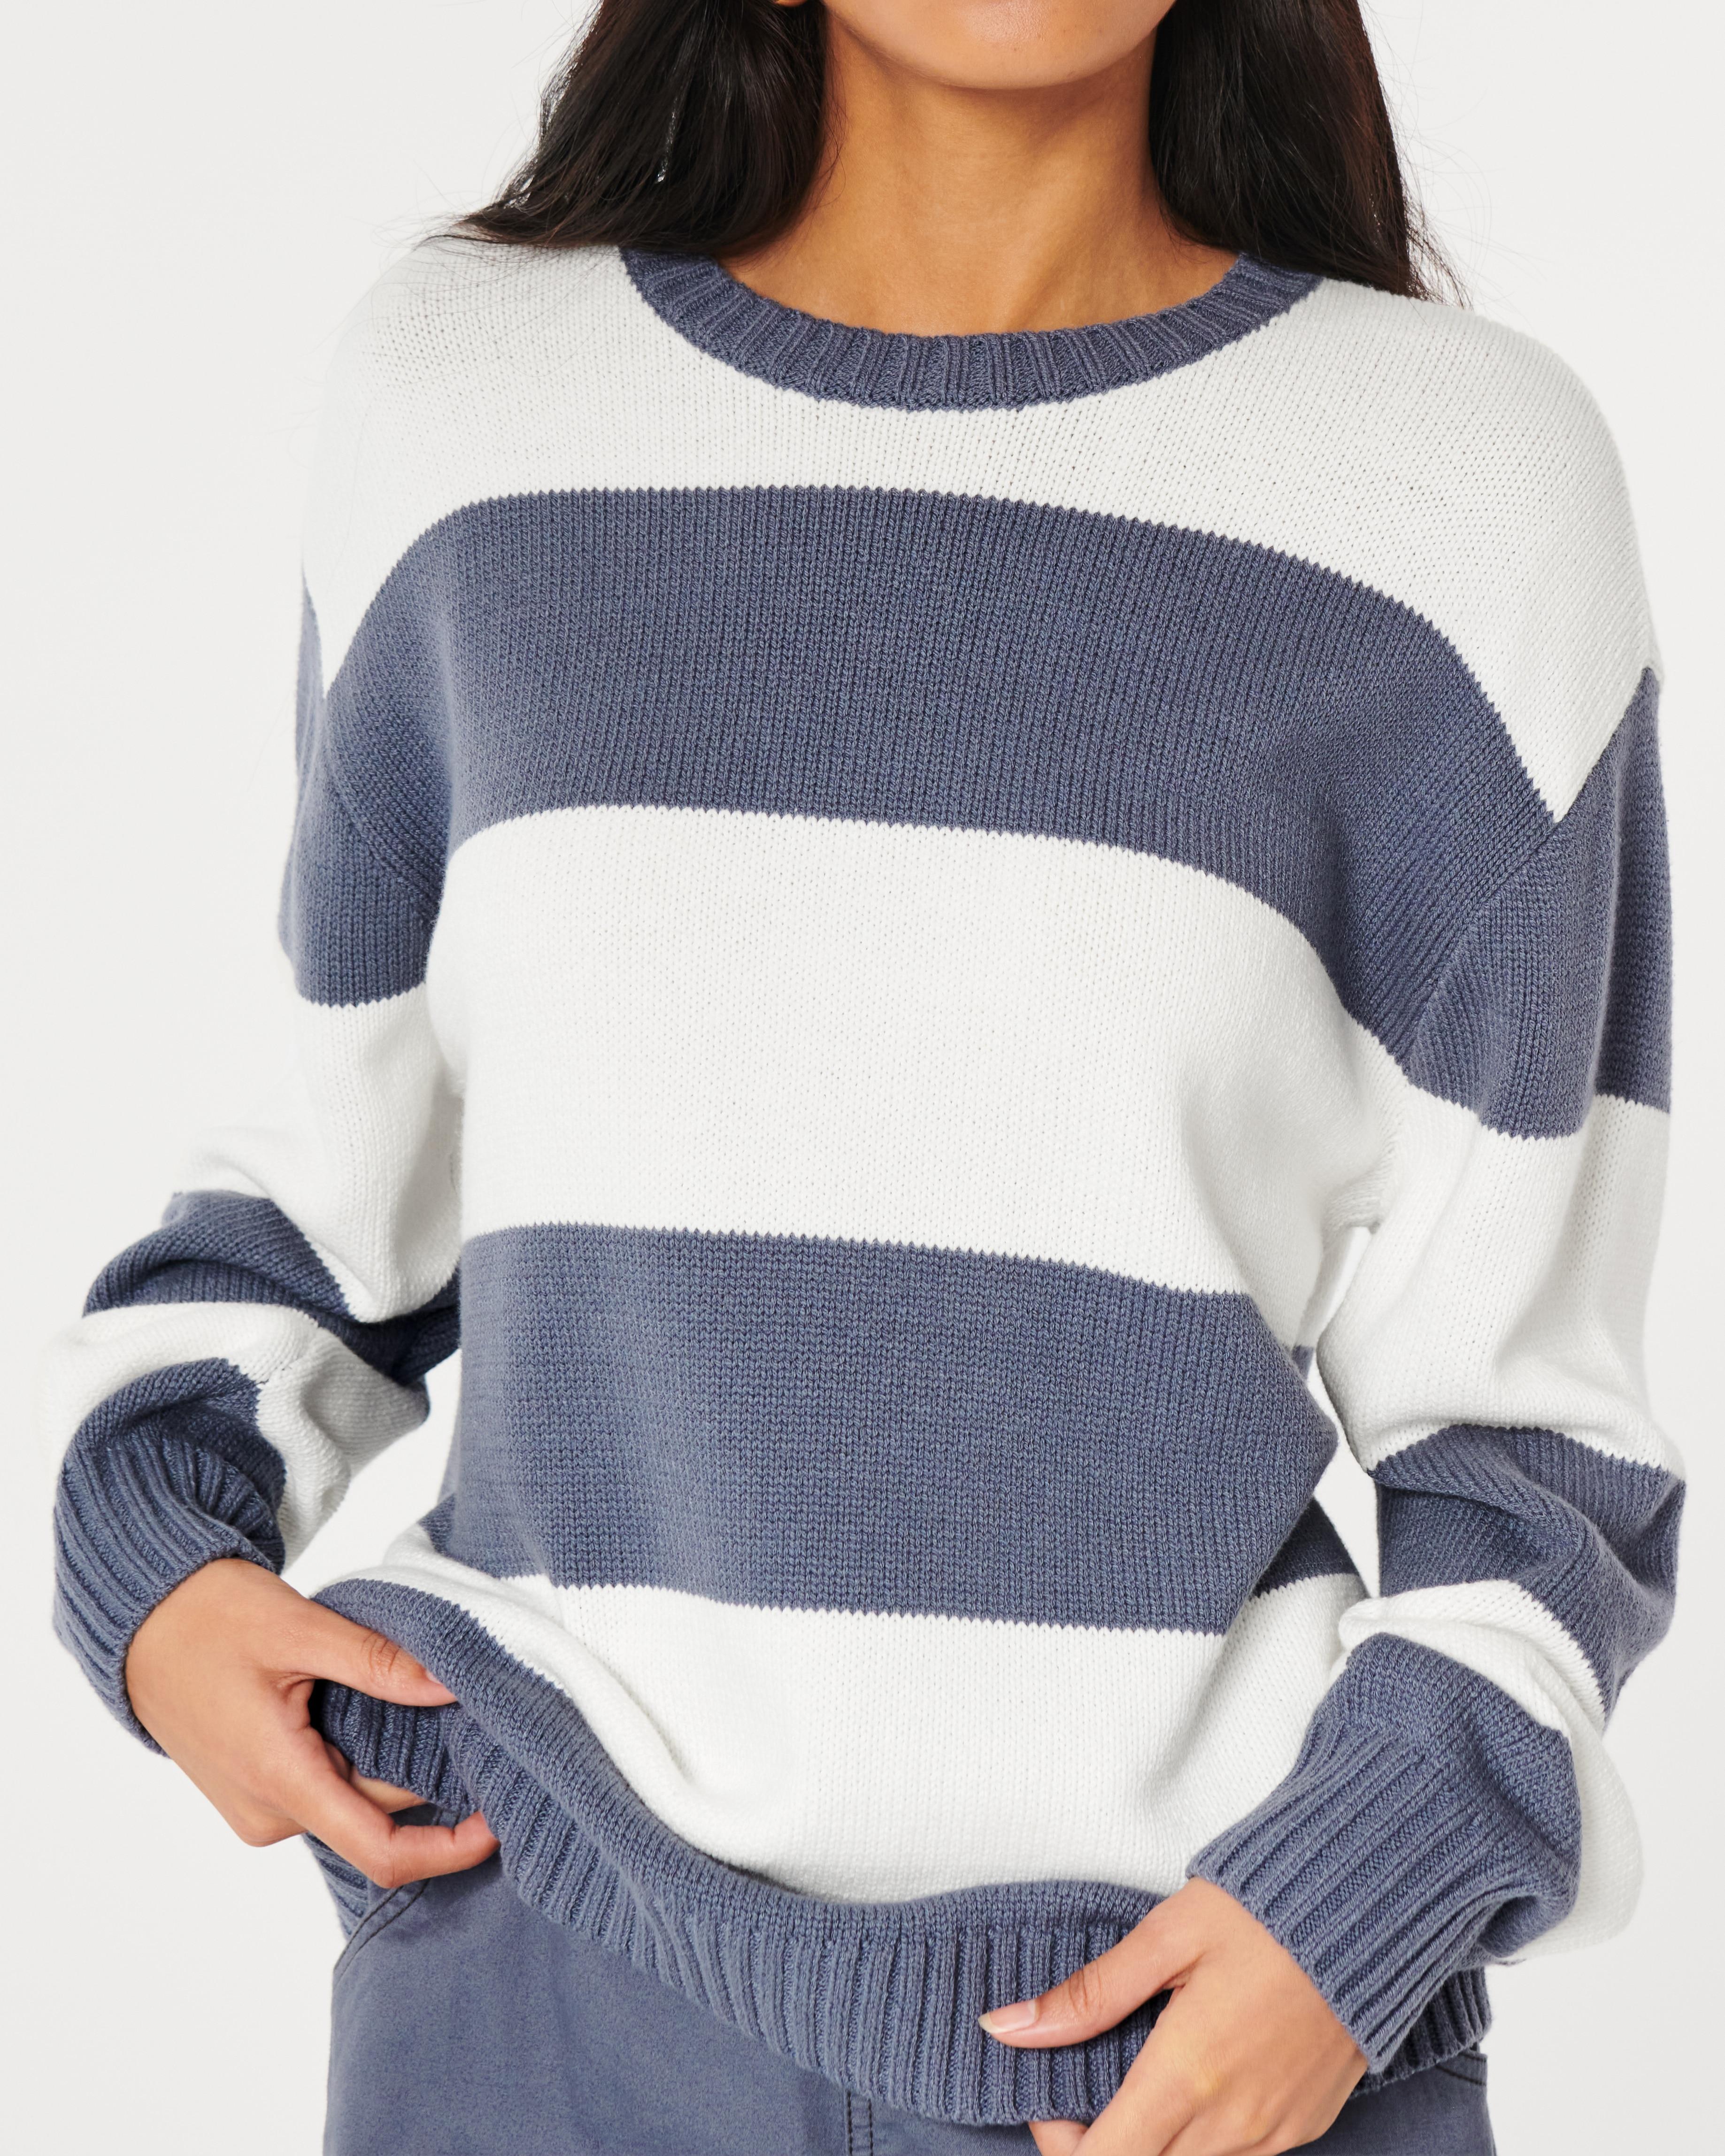 Hollister Sweater Blue And White Stripes Size XS, - Depop